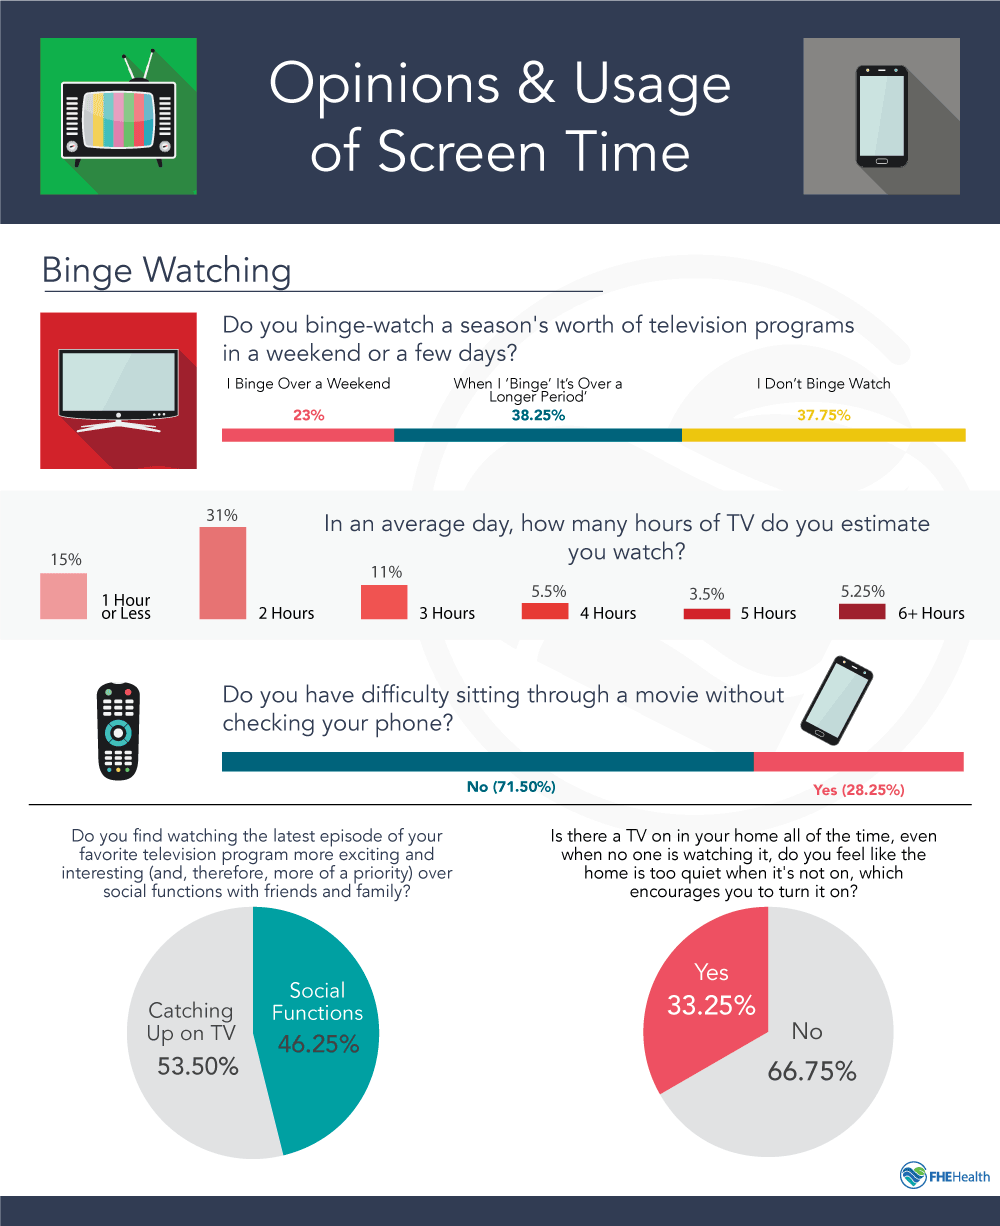 Opinions & usage of screen time